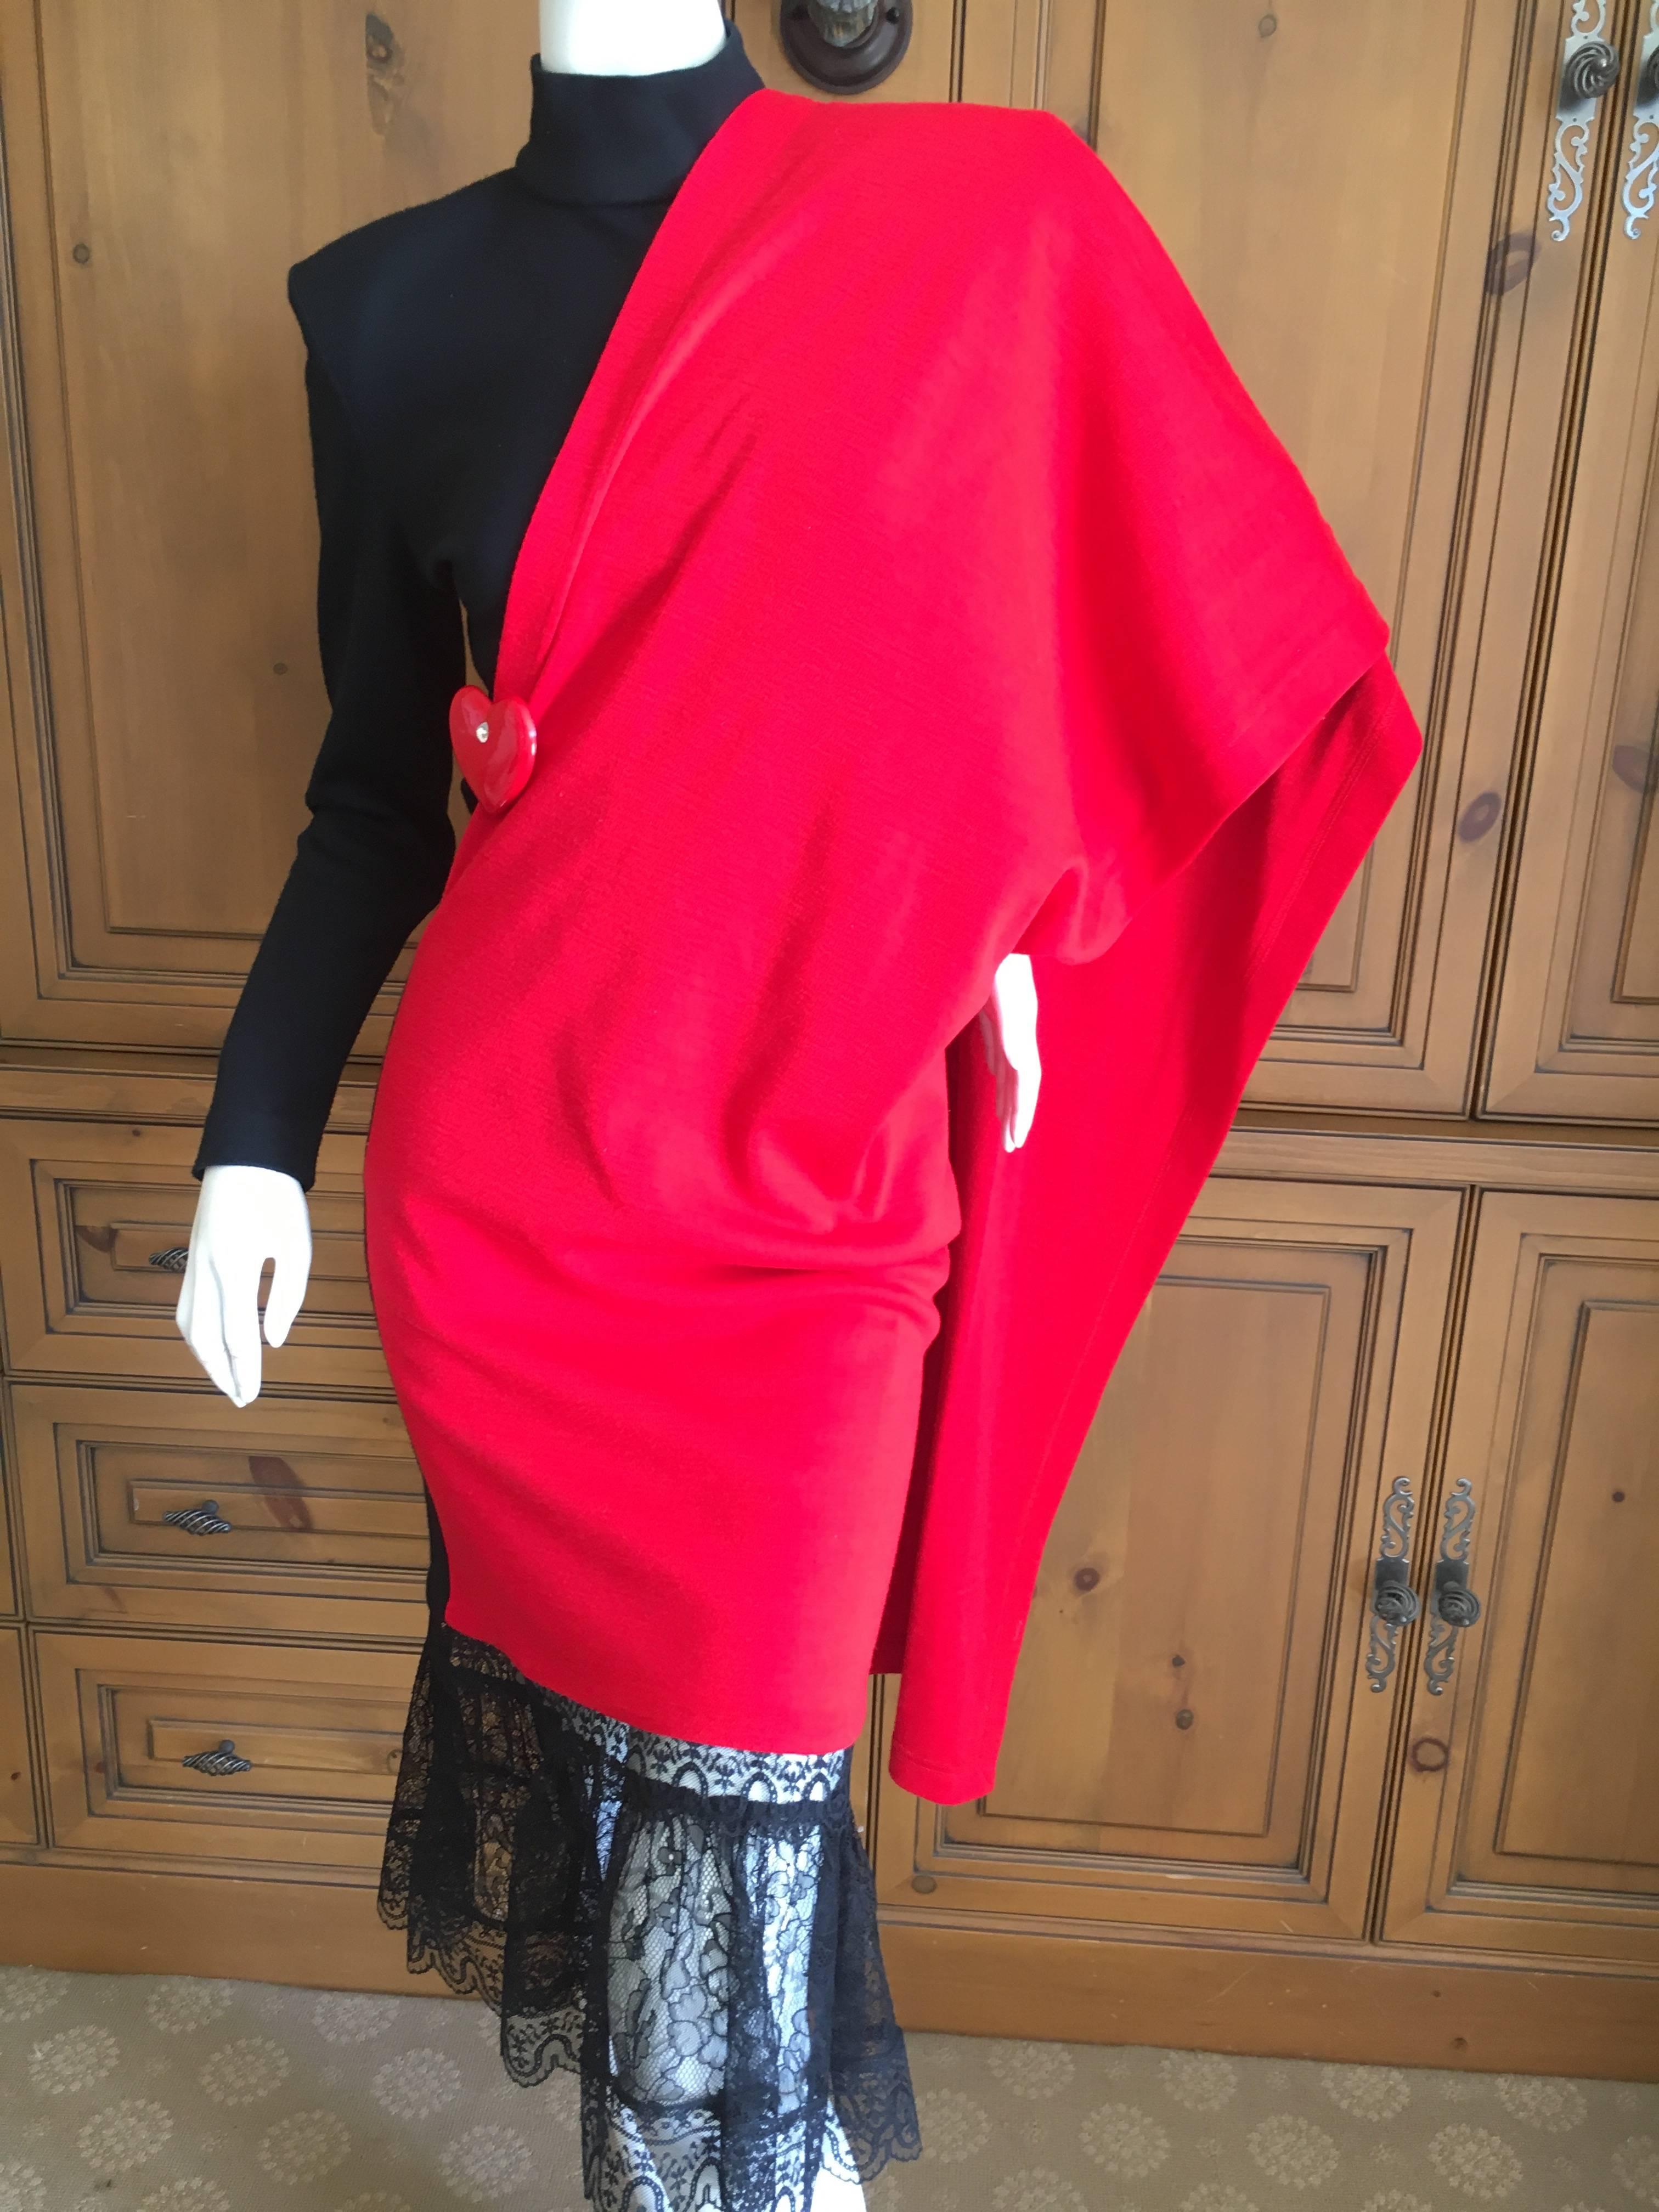 Women's Patrick Kelly Paris Vintage Black Dress with Heart Charm and Red Sash Cape For Sale